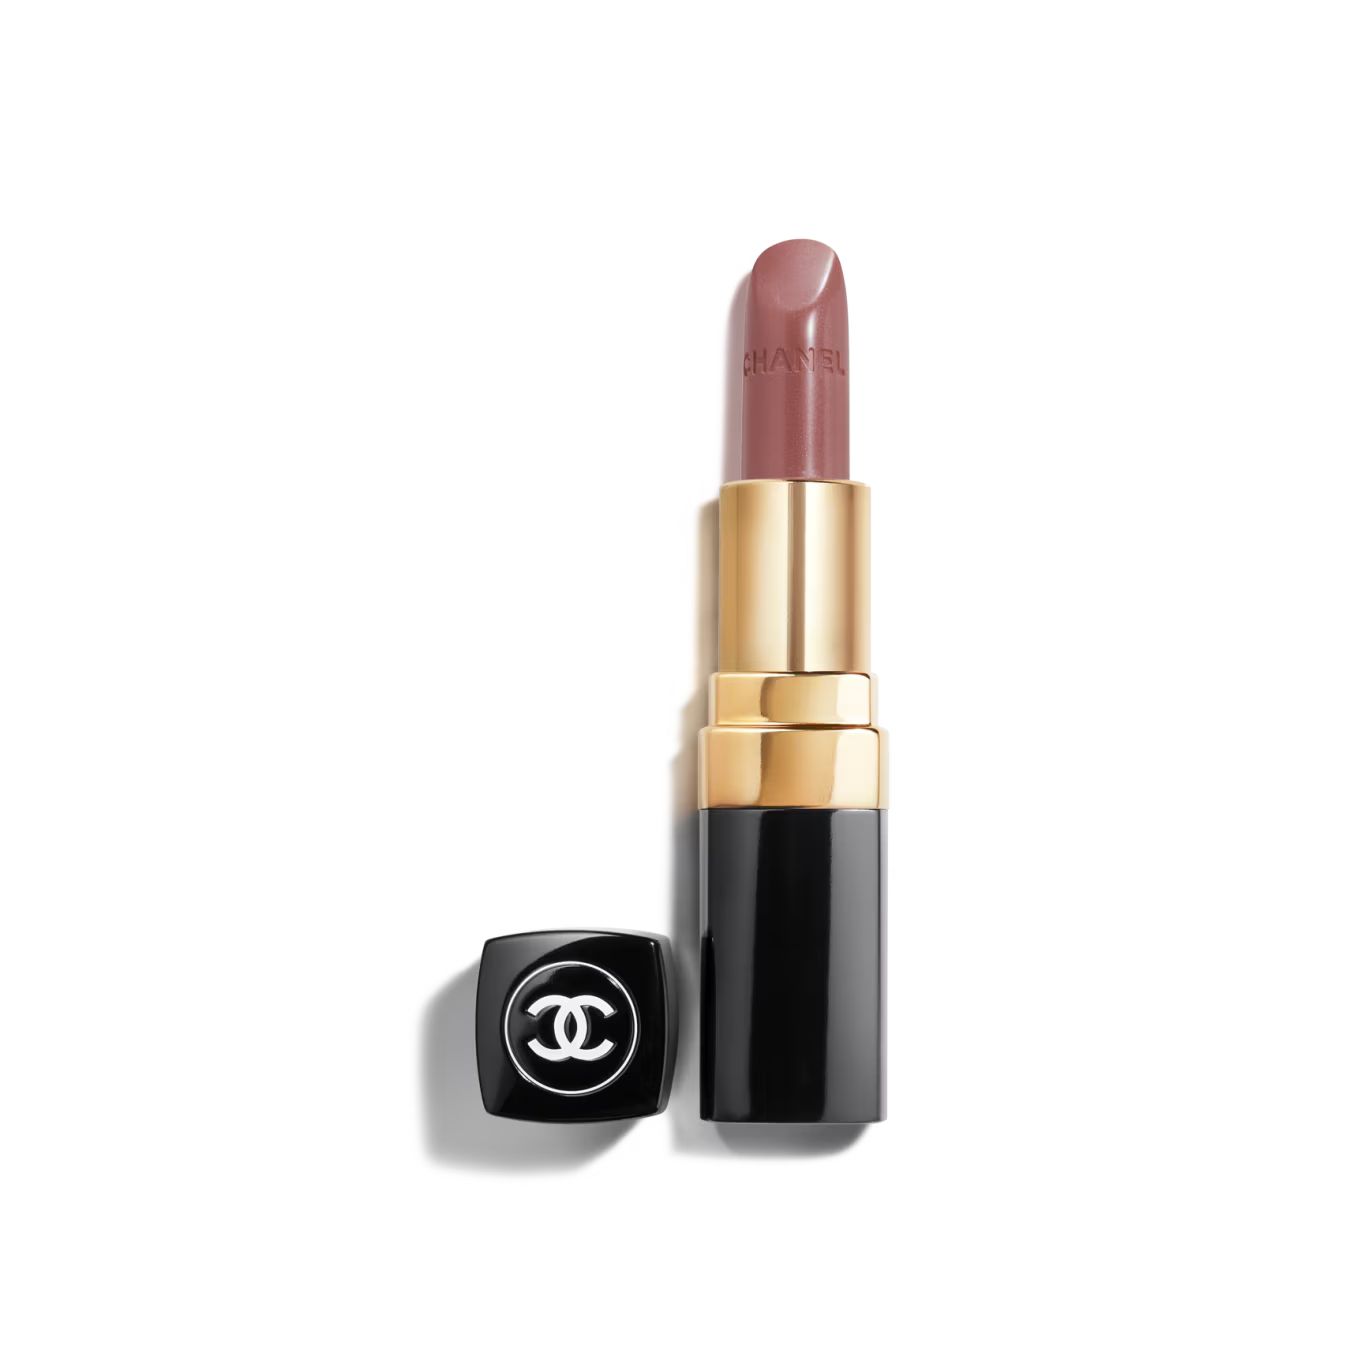 ROUGE COCO Ultra hydrating lip colour 434 - Mademoiselle | CHANEL | Chanel, Inc. (US)